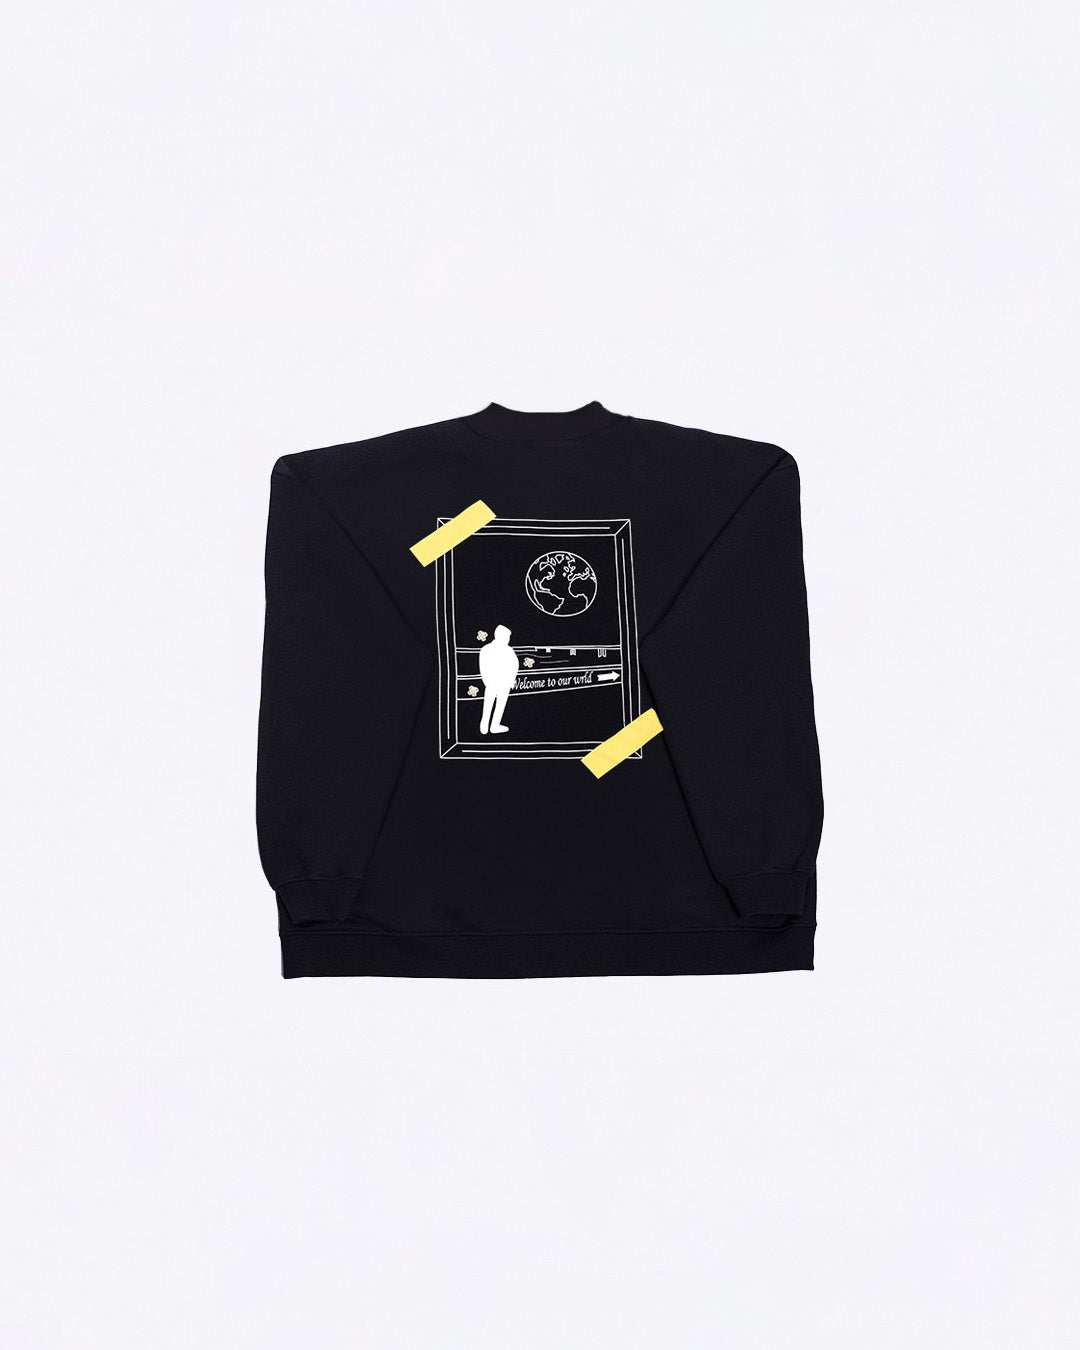 Crewneck noir - "Welcome to our world"